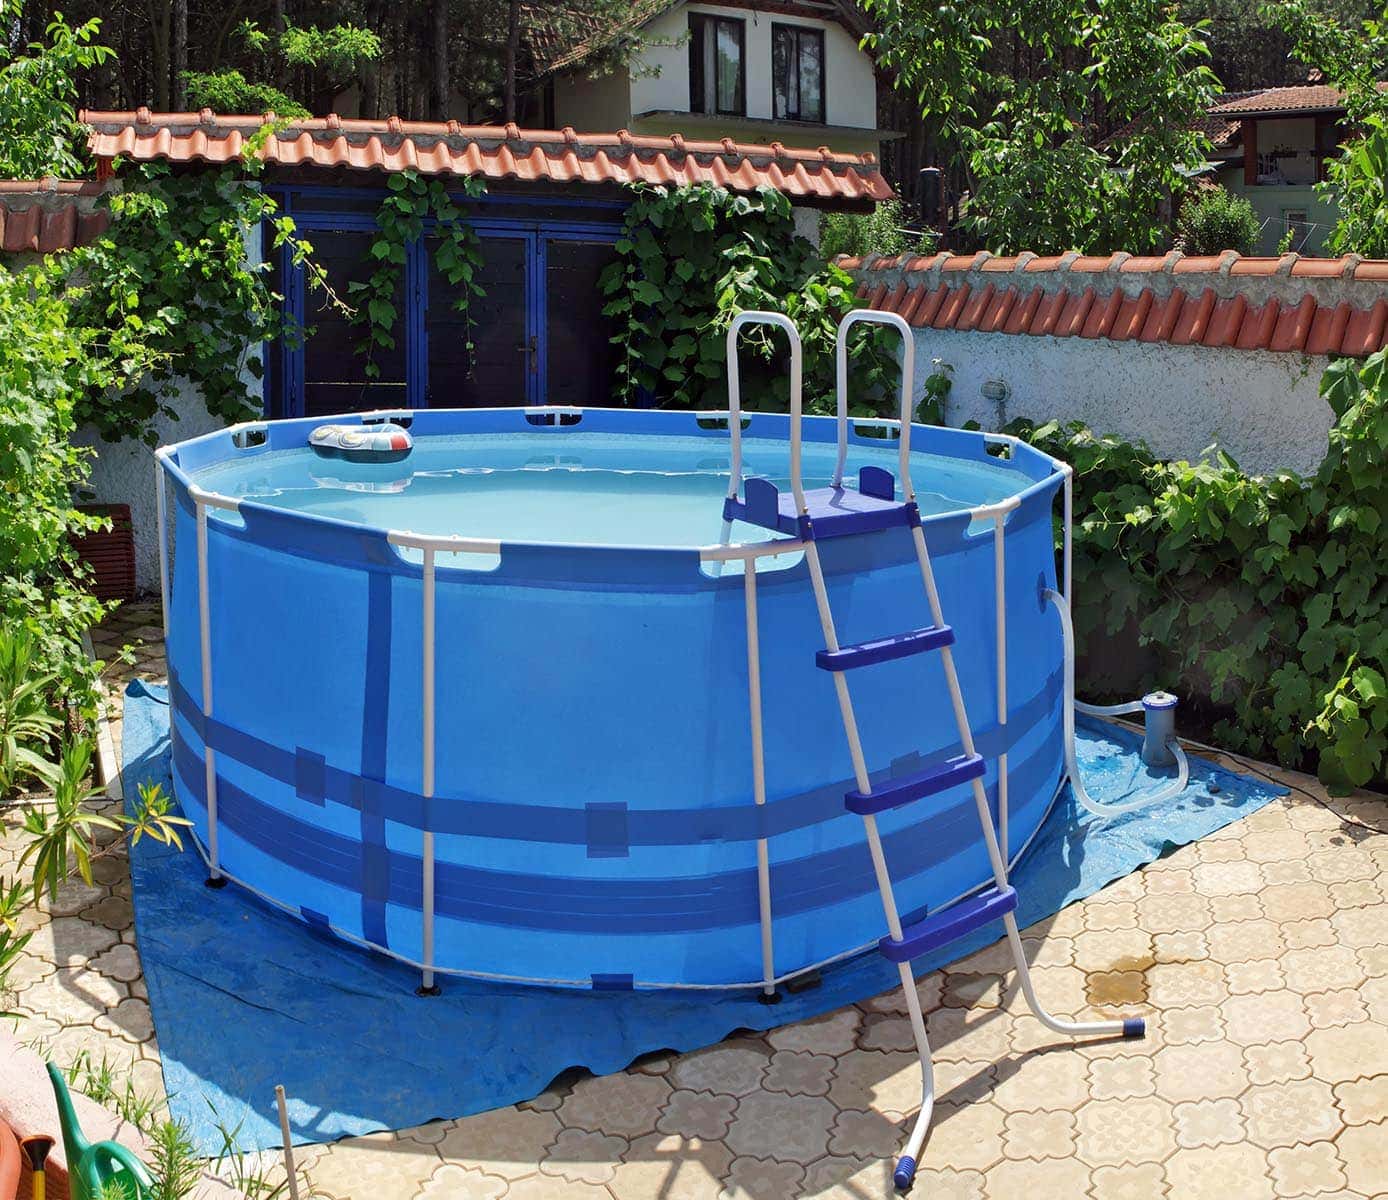 Above Ground Pool On Grass, What To Put In Your Above Ground Pool When You Open It